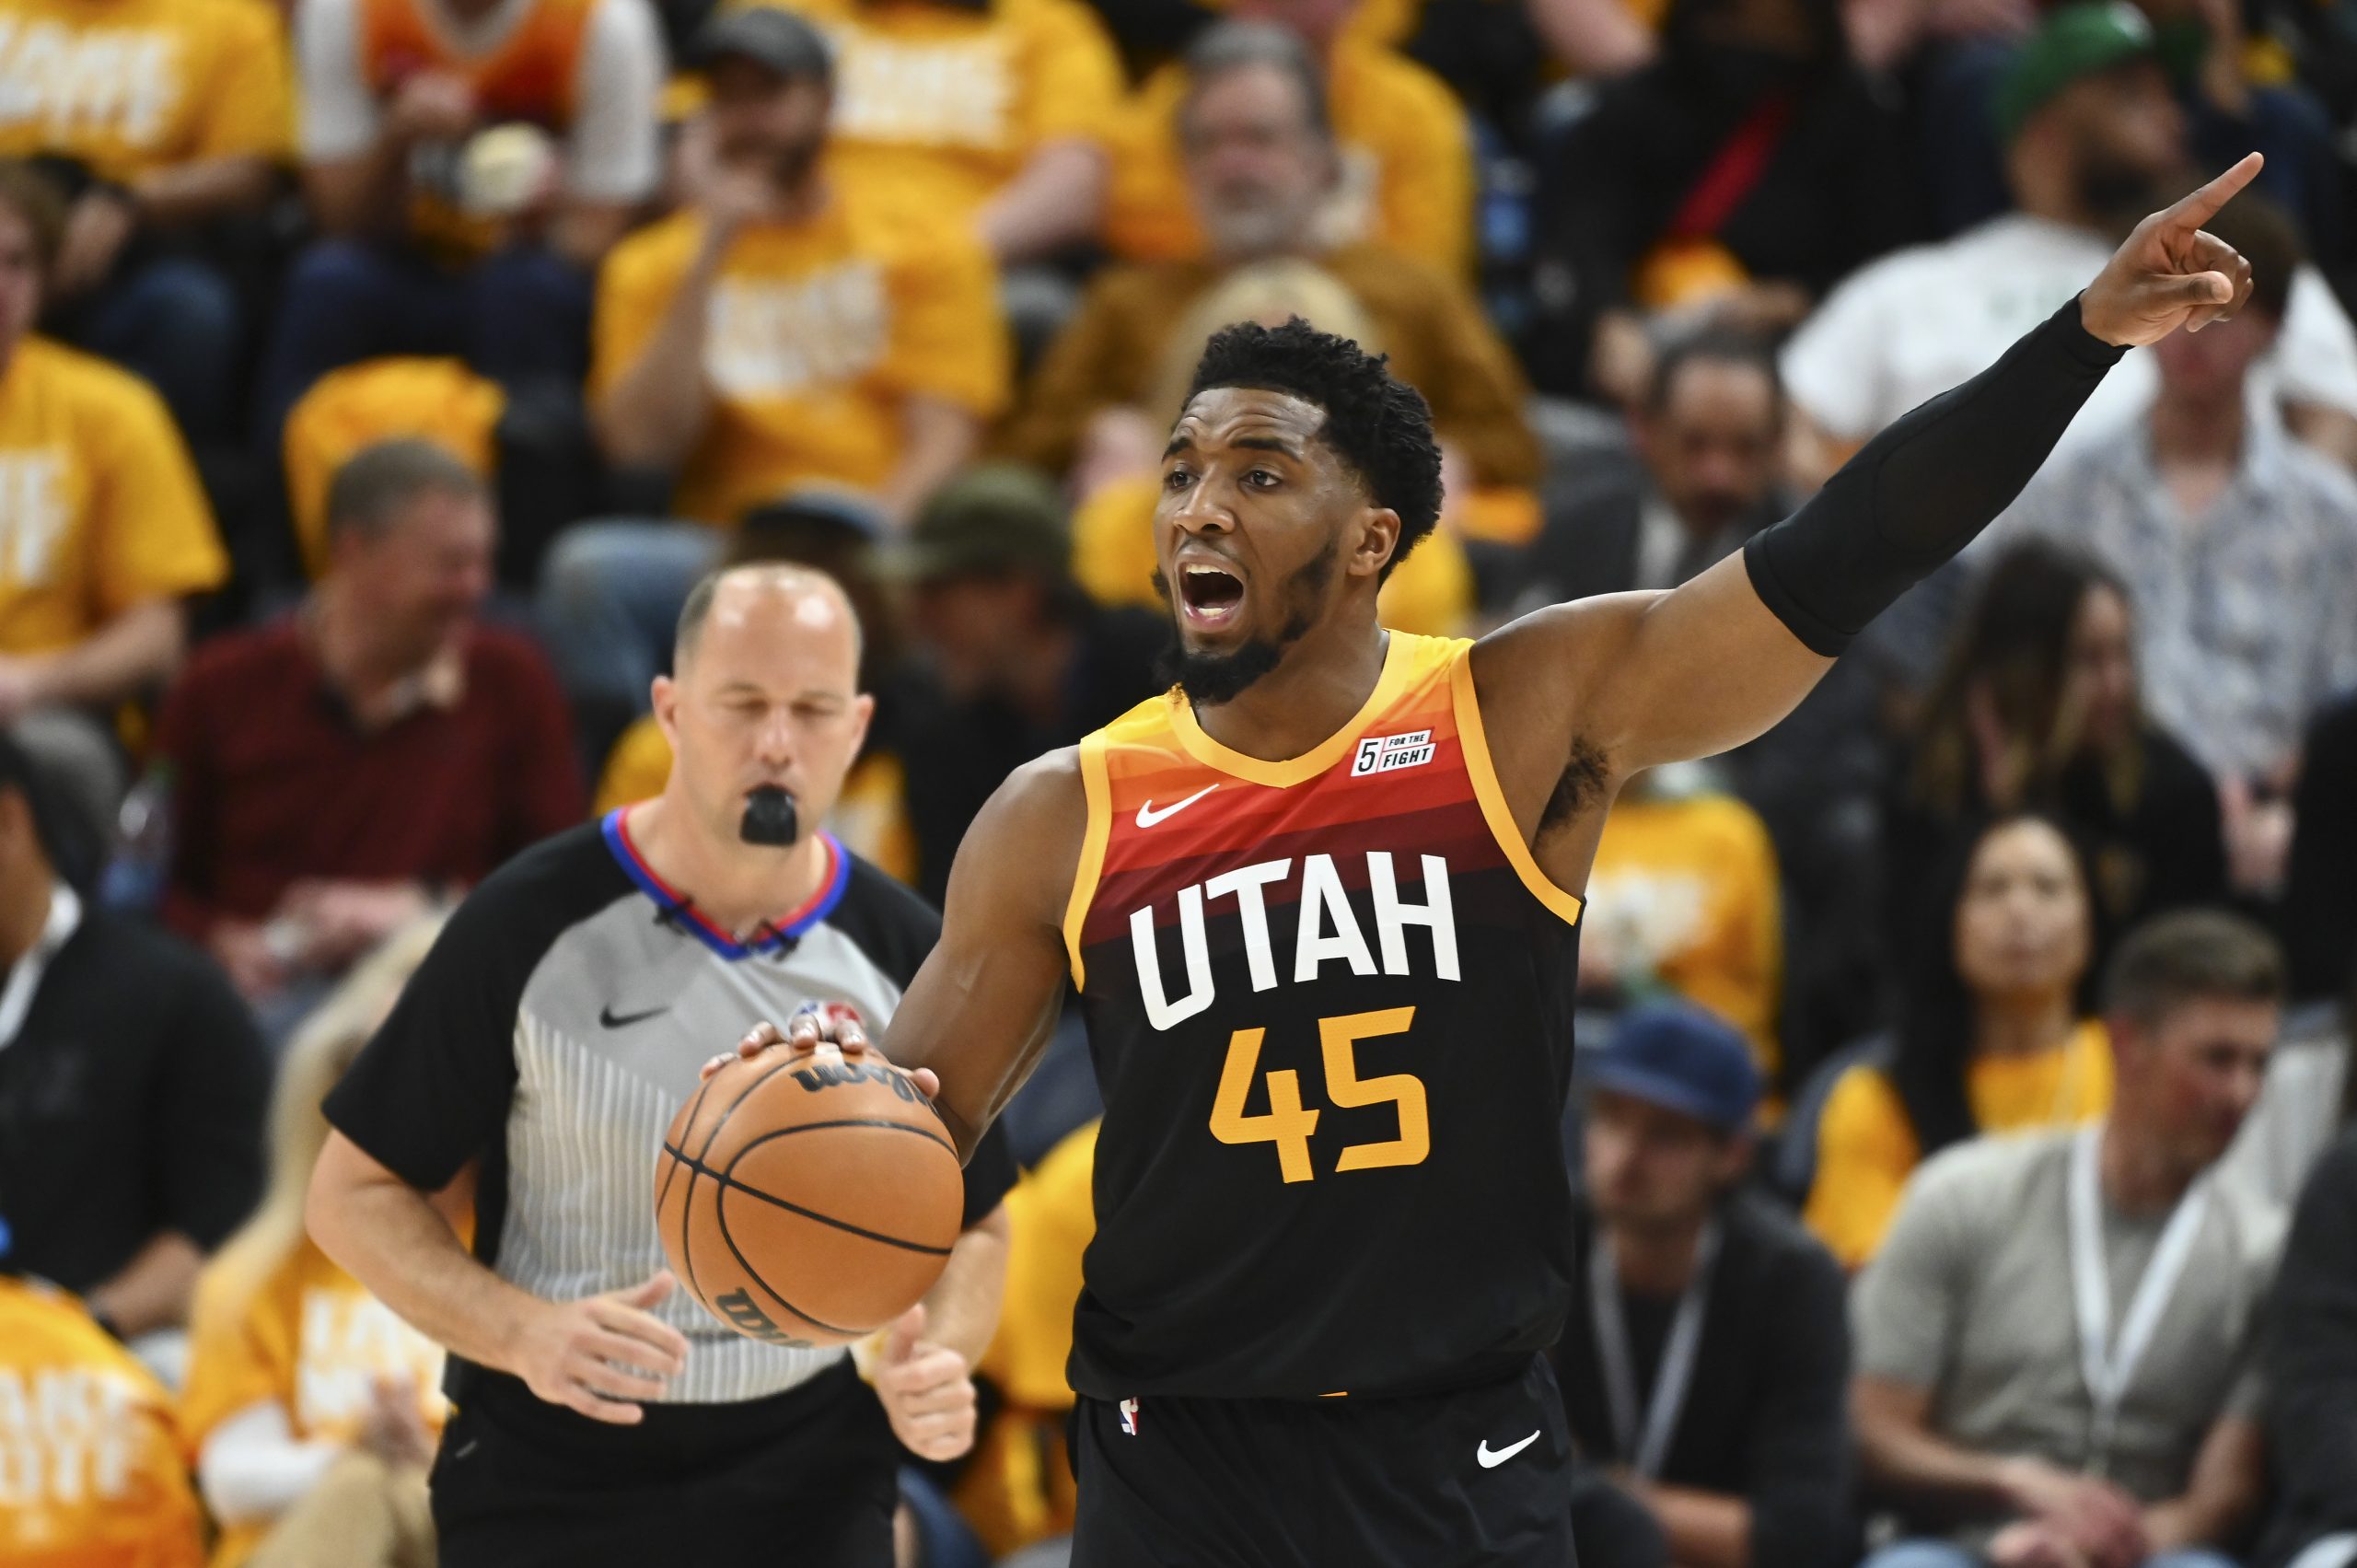 REPORT: Donovan Mitchell Trade Talks Re-engaged Between the Jazz and Knicks